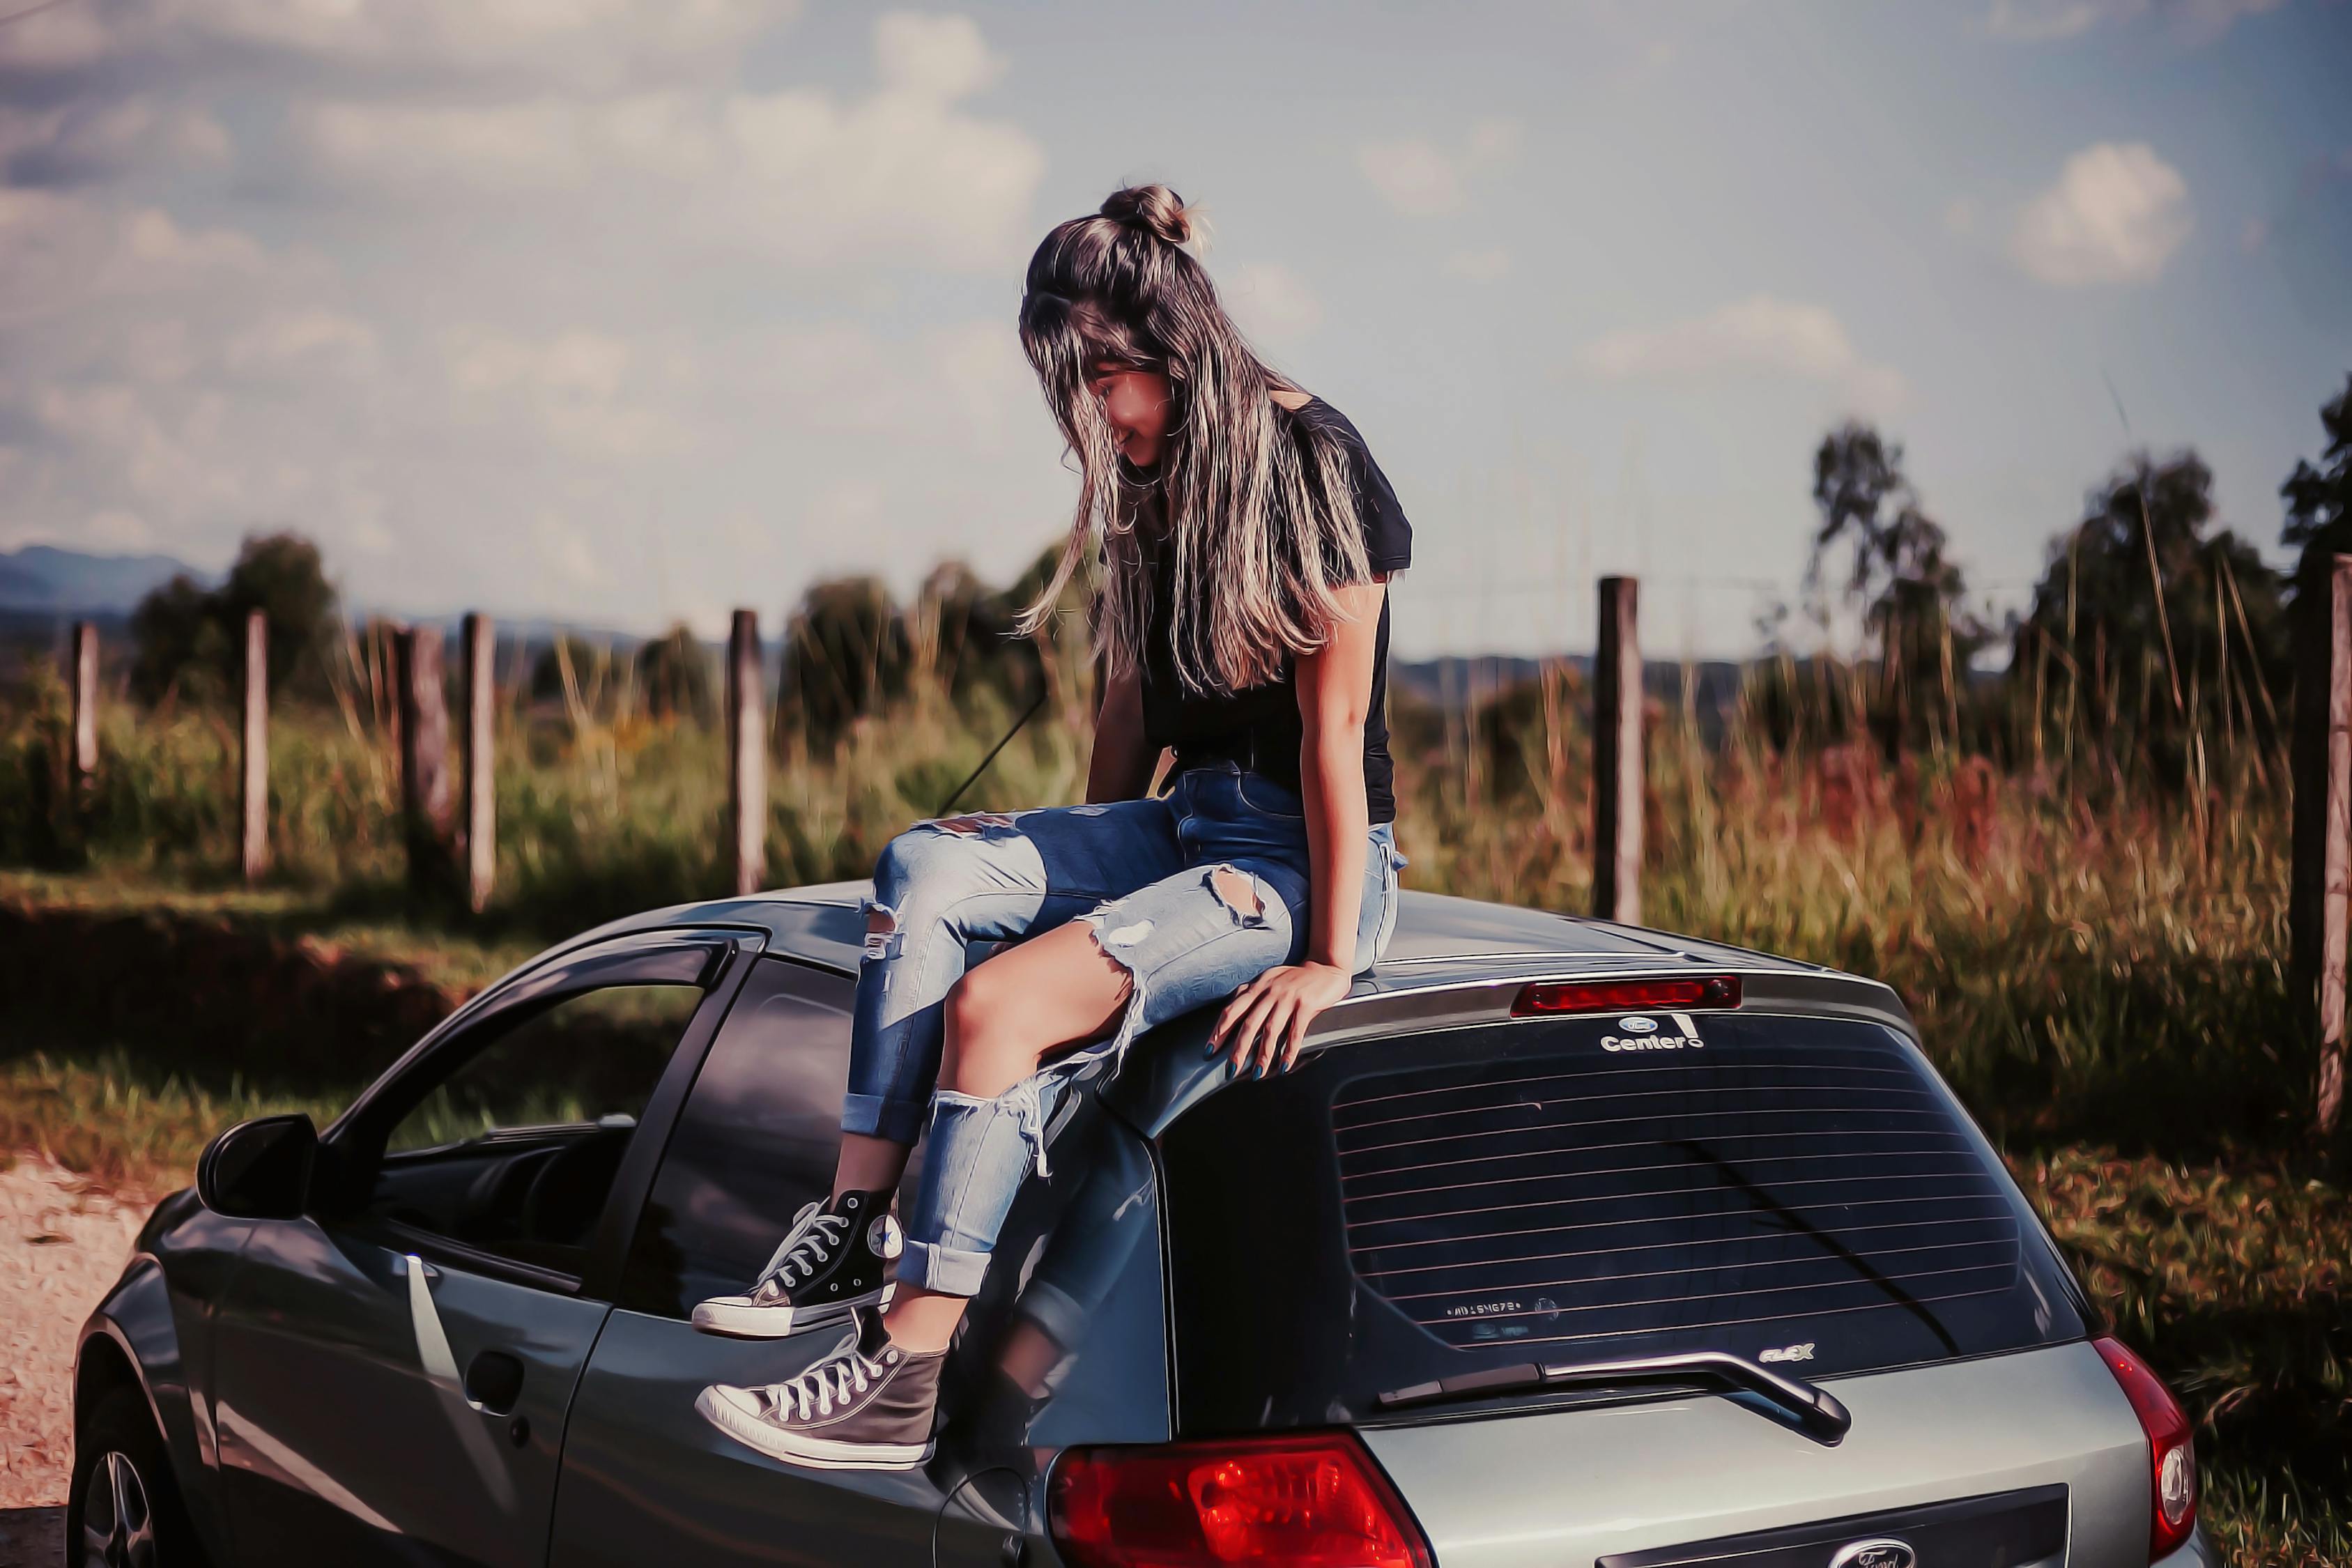 Woman Wearing Black Shirt And Blue Denim Jeans Sitting On Vehicle Roof ...